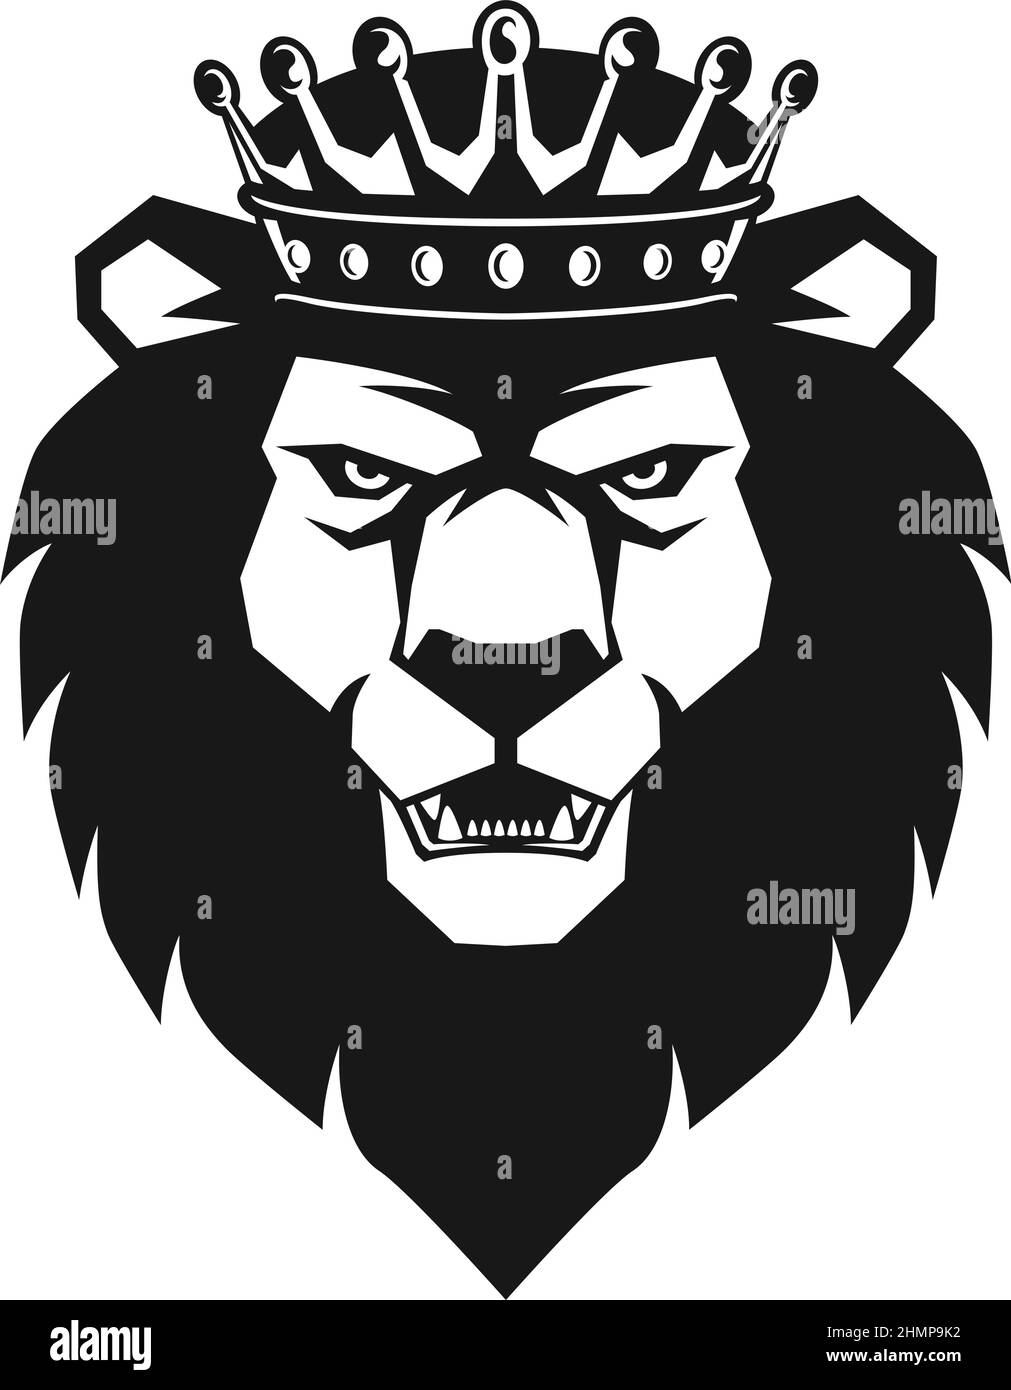 Lion King with Crown Edgy Design Stock Vector